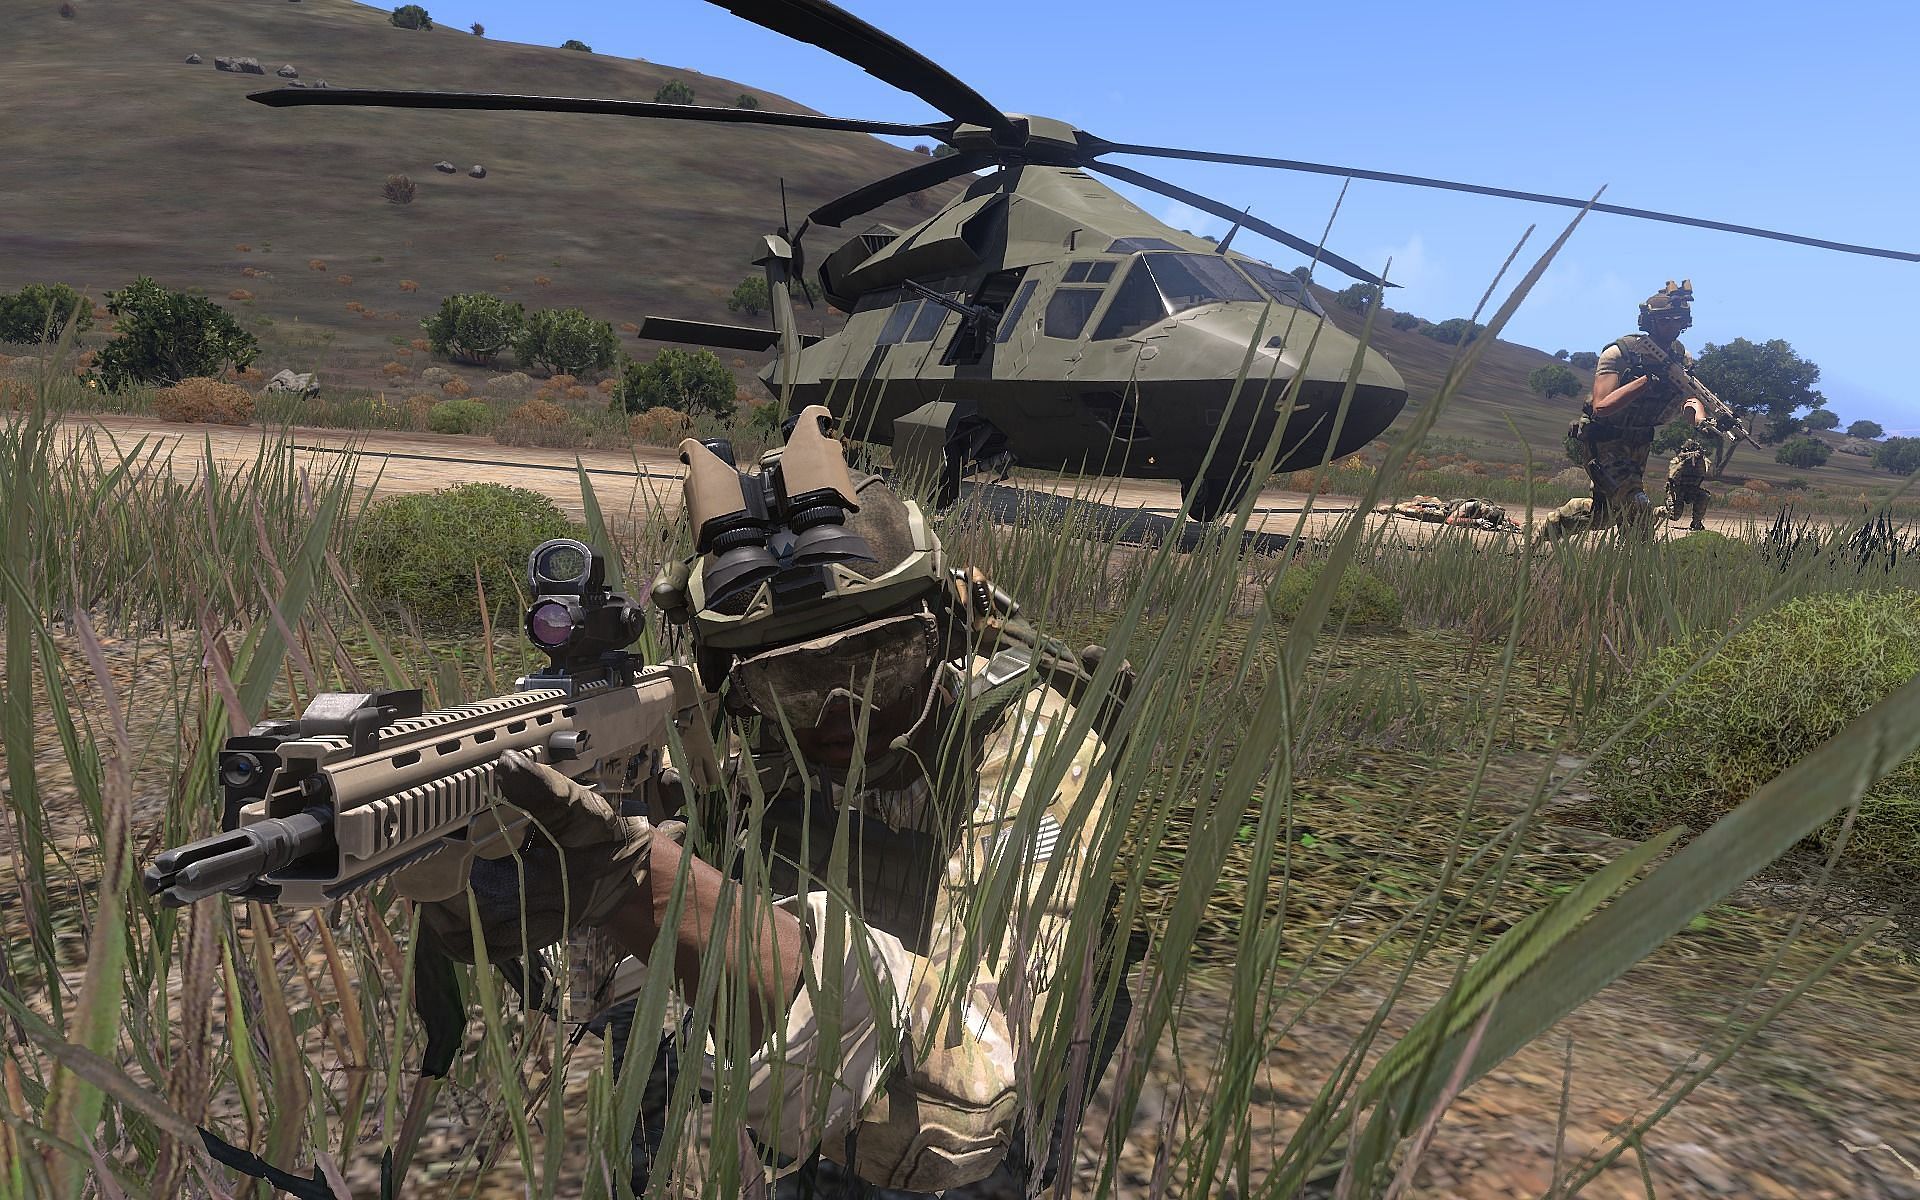 Arma's console debut to be timed Xbox exclusive, leak suggests